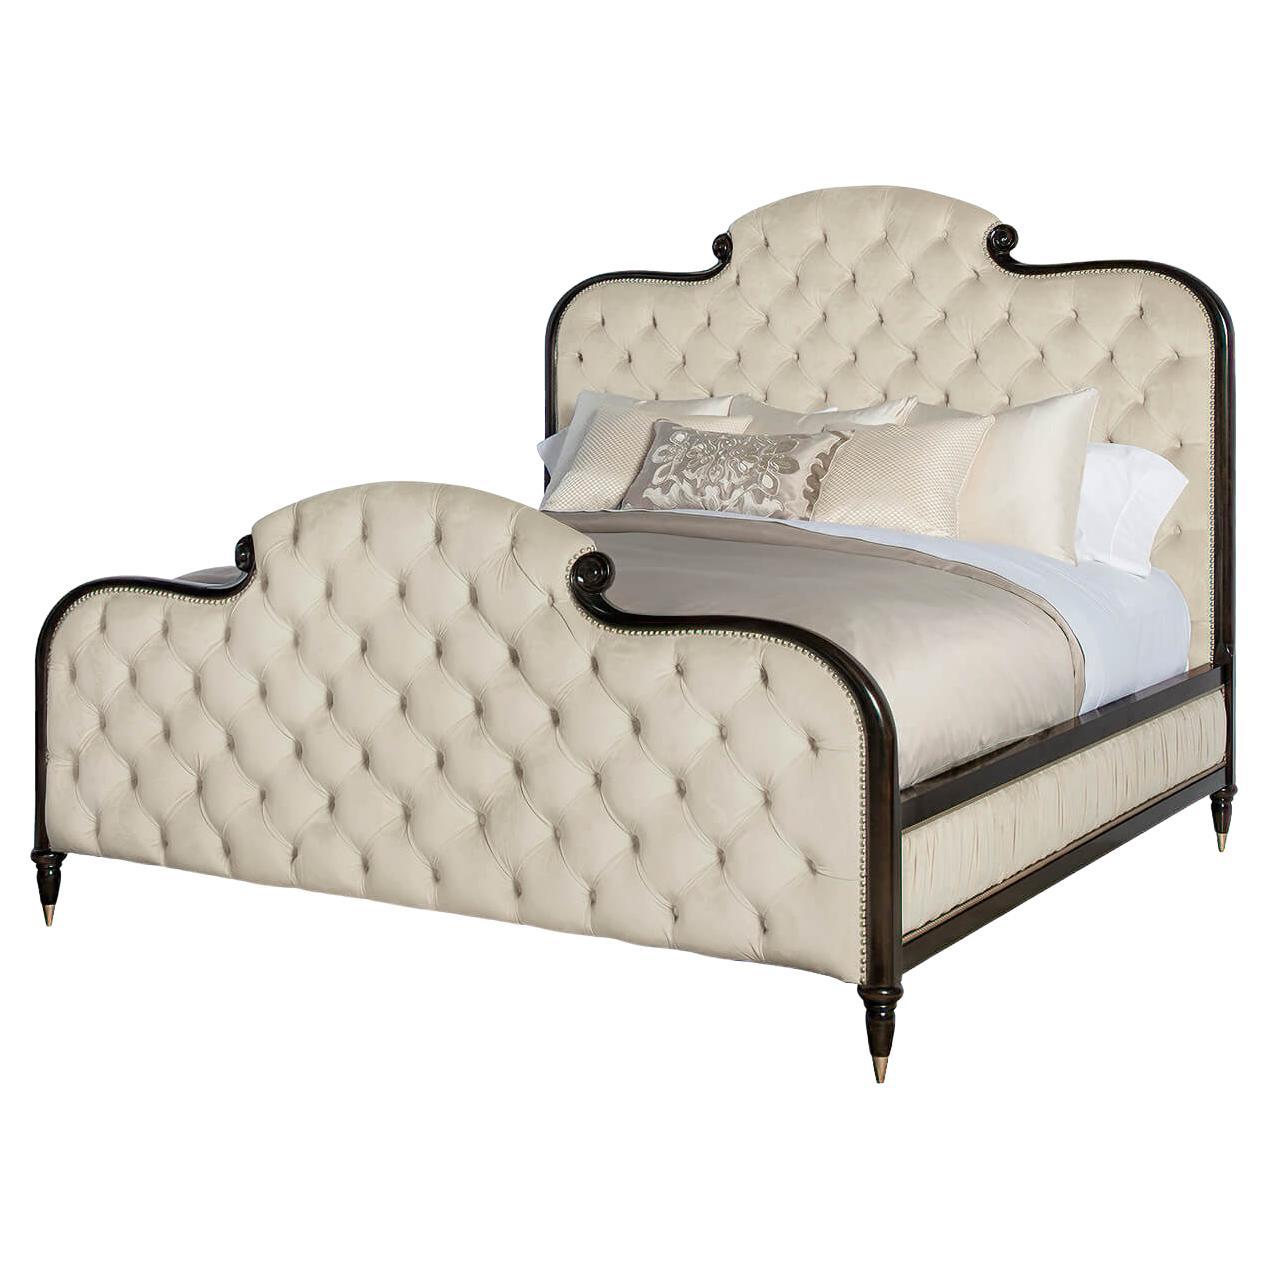 English Regency Tufted Queen Size Bed For Sale